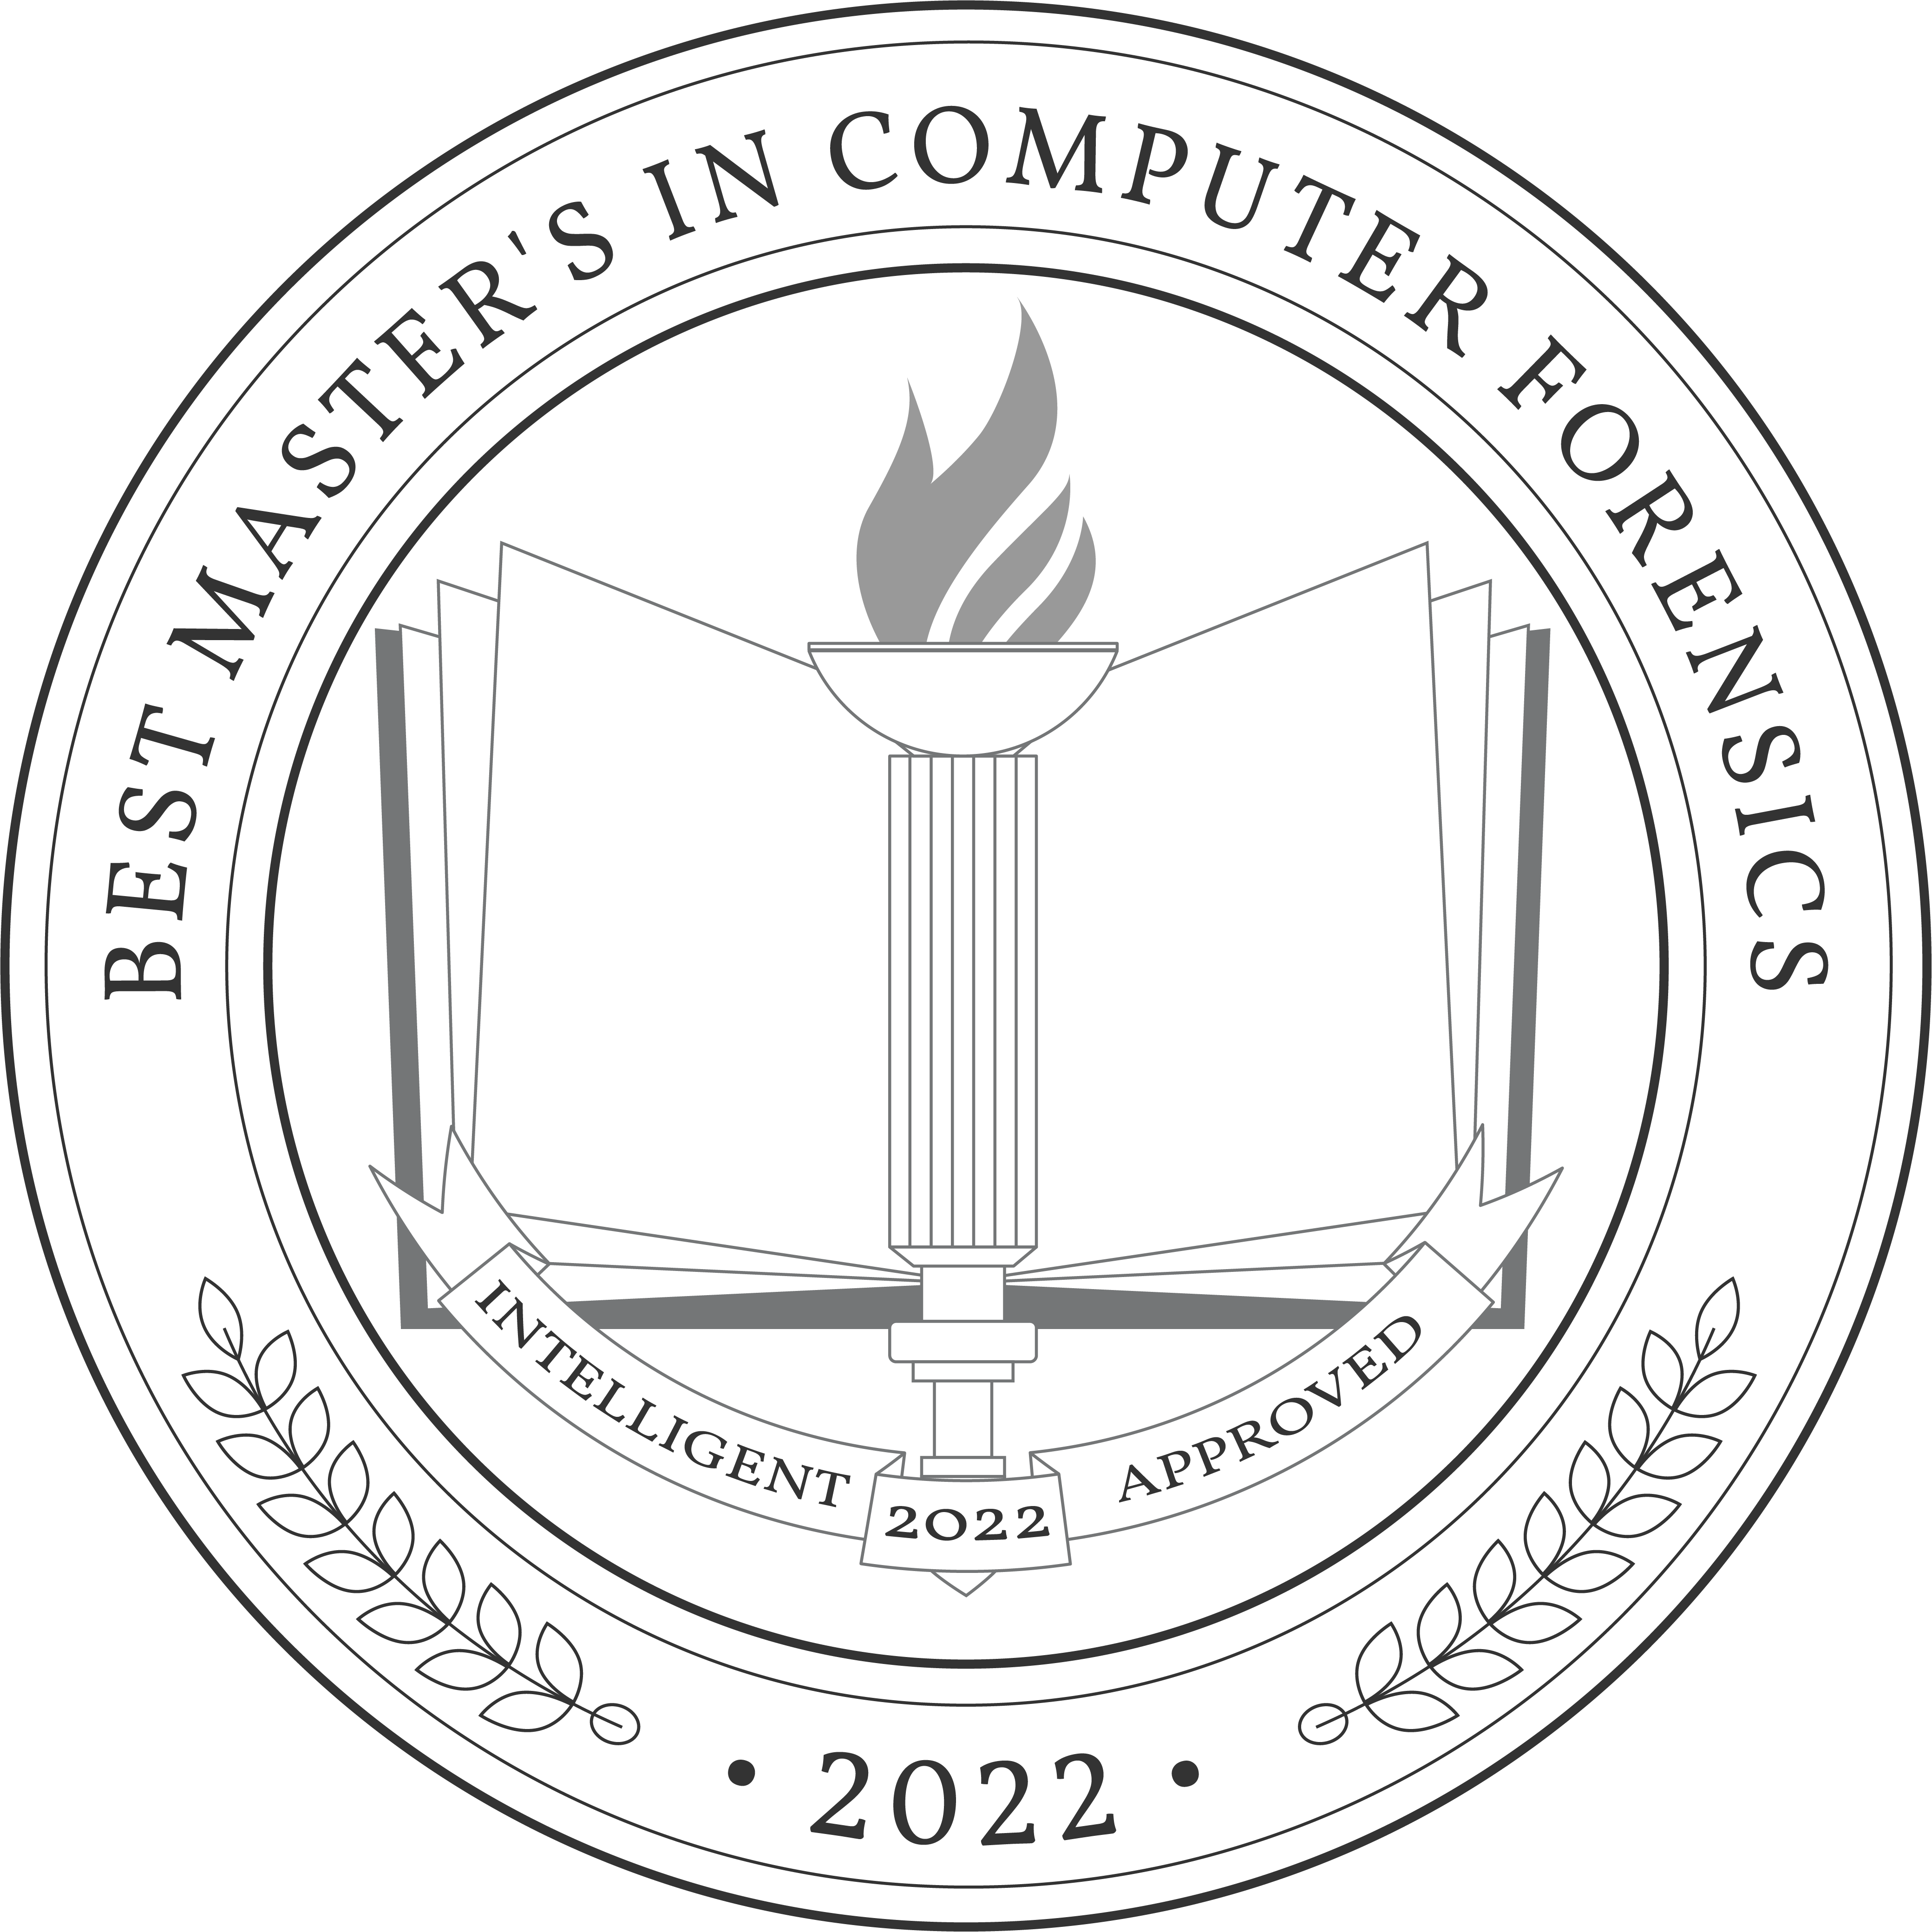 Best Master's in Computer Forensics Degree Programs